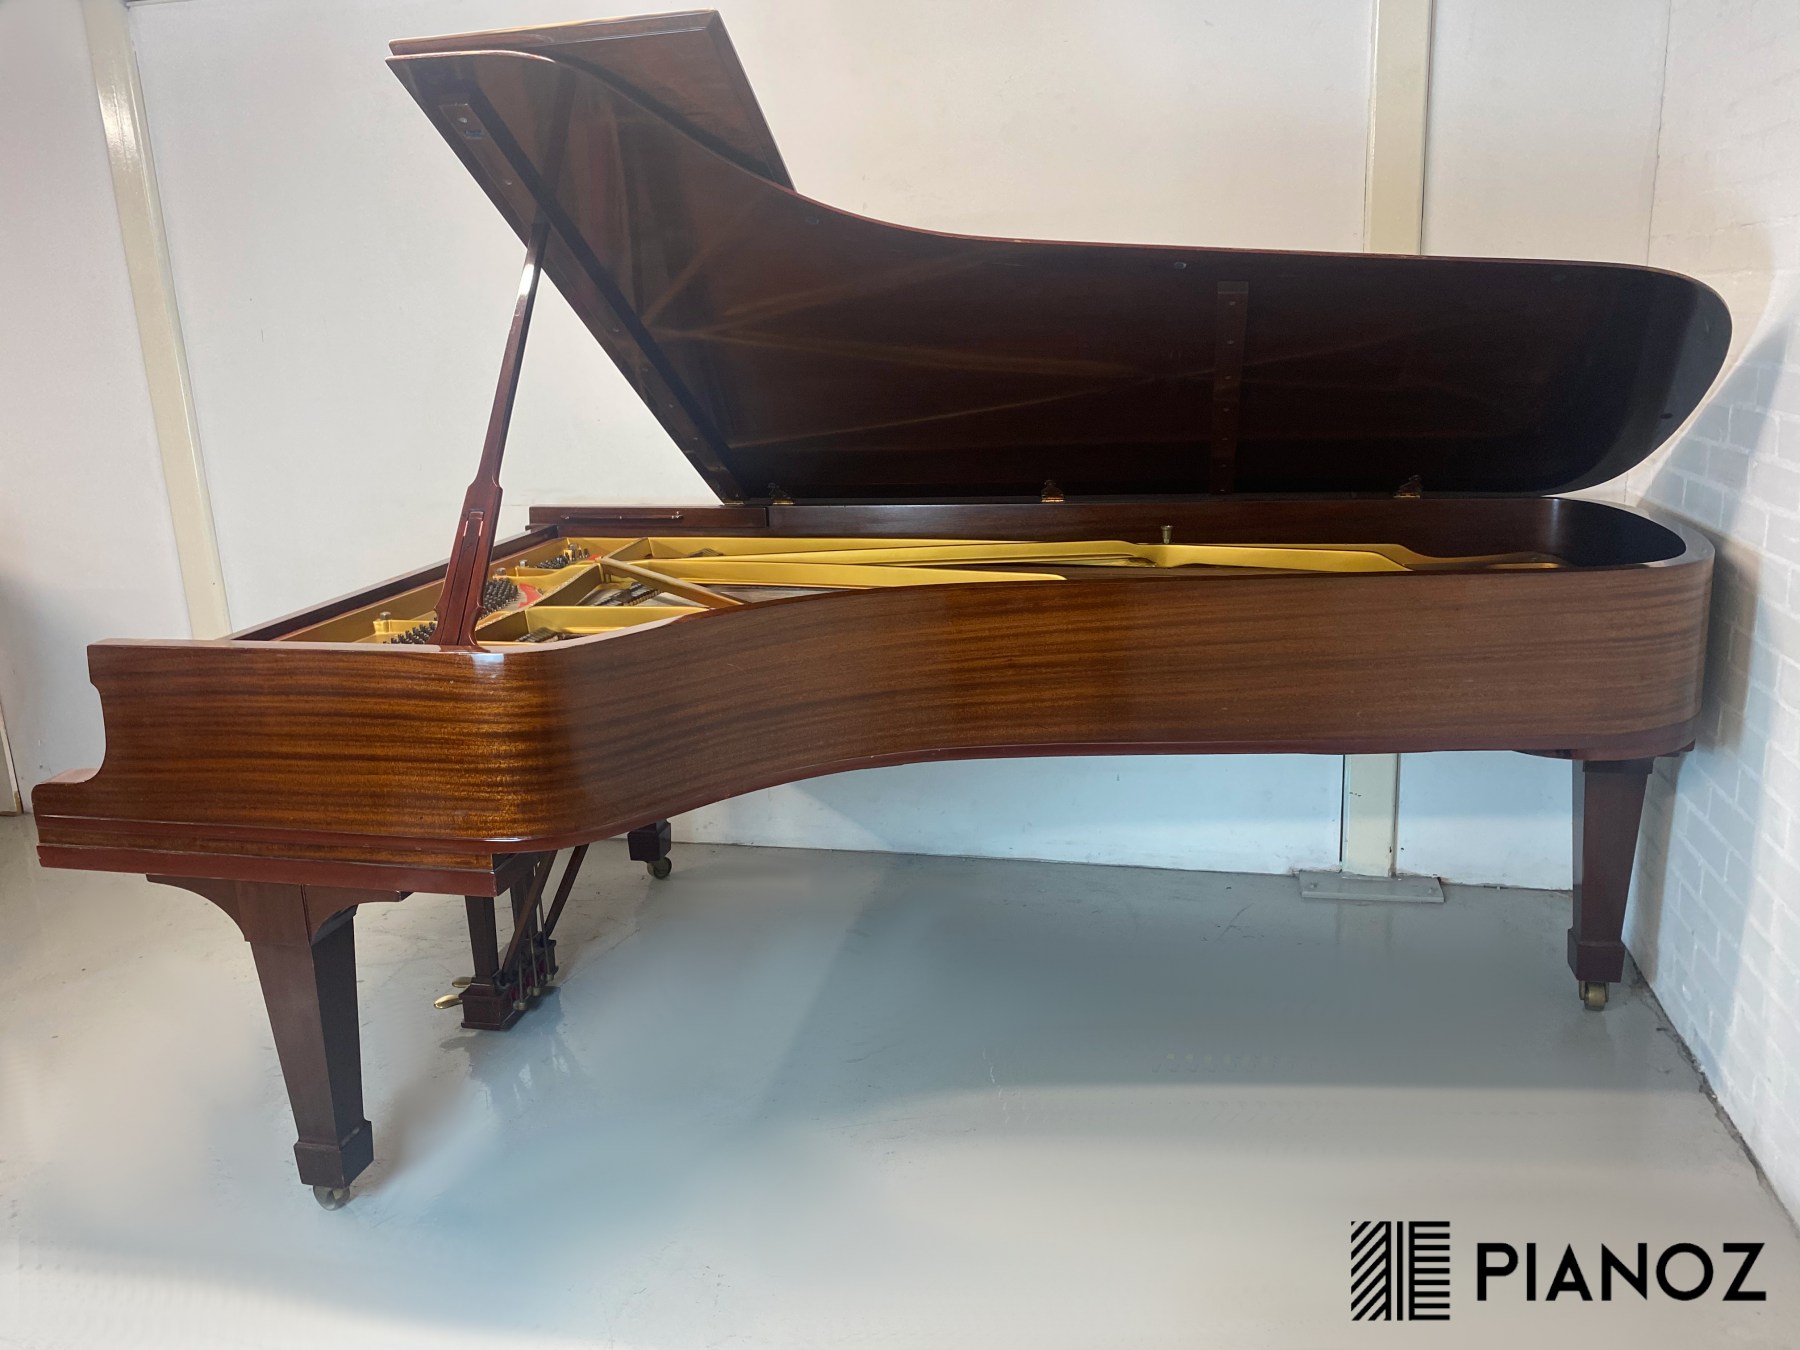 Steinway & Sons Model D 274 Concert Grand piano for sale in UK